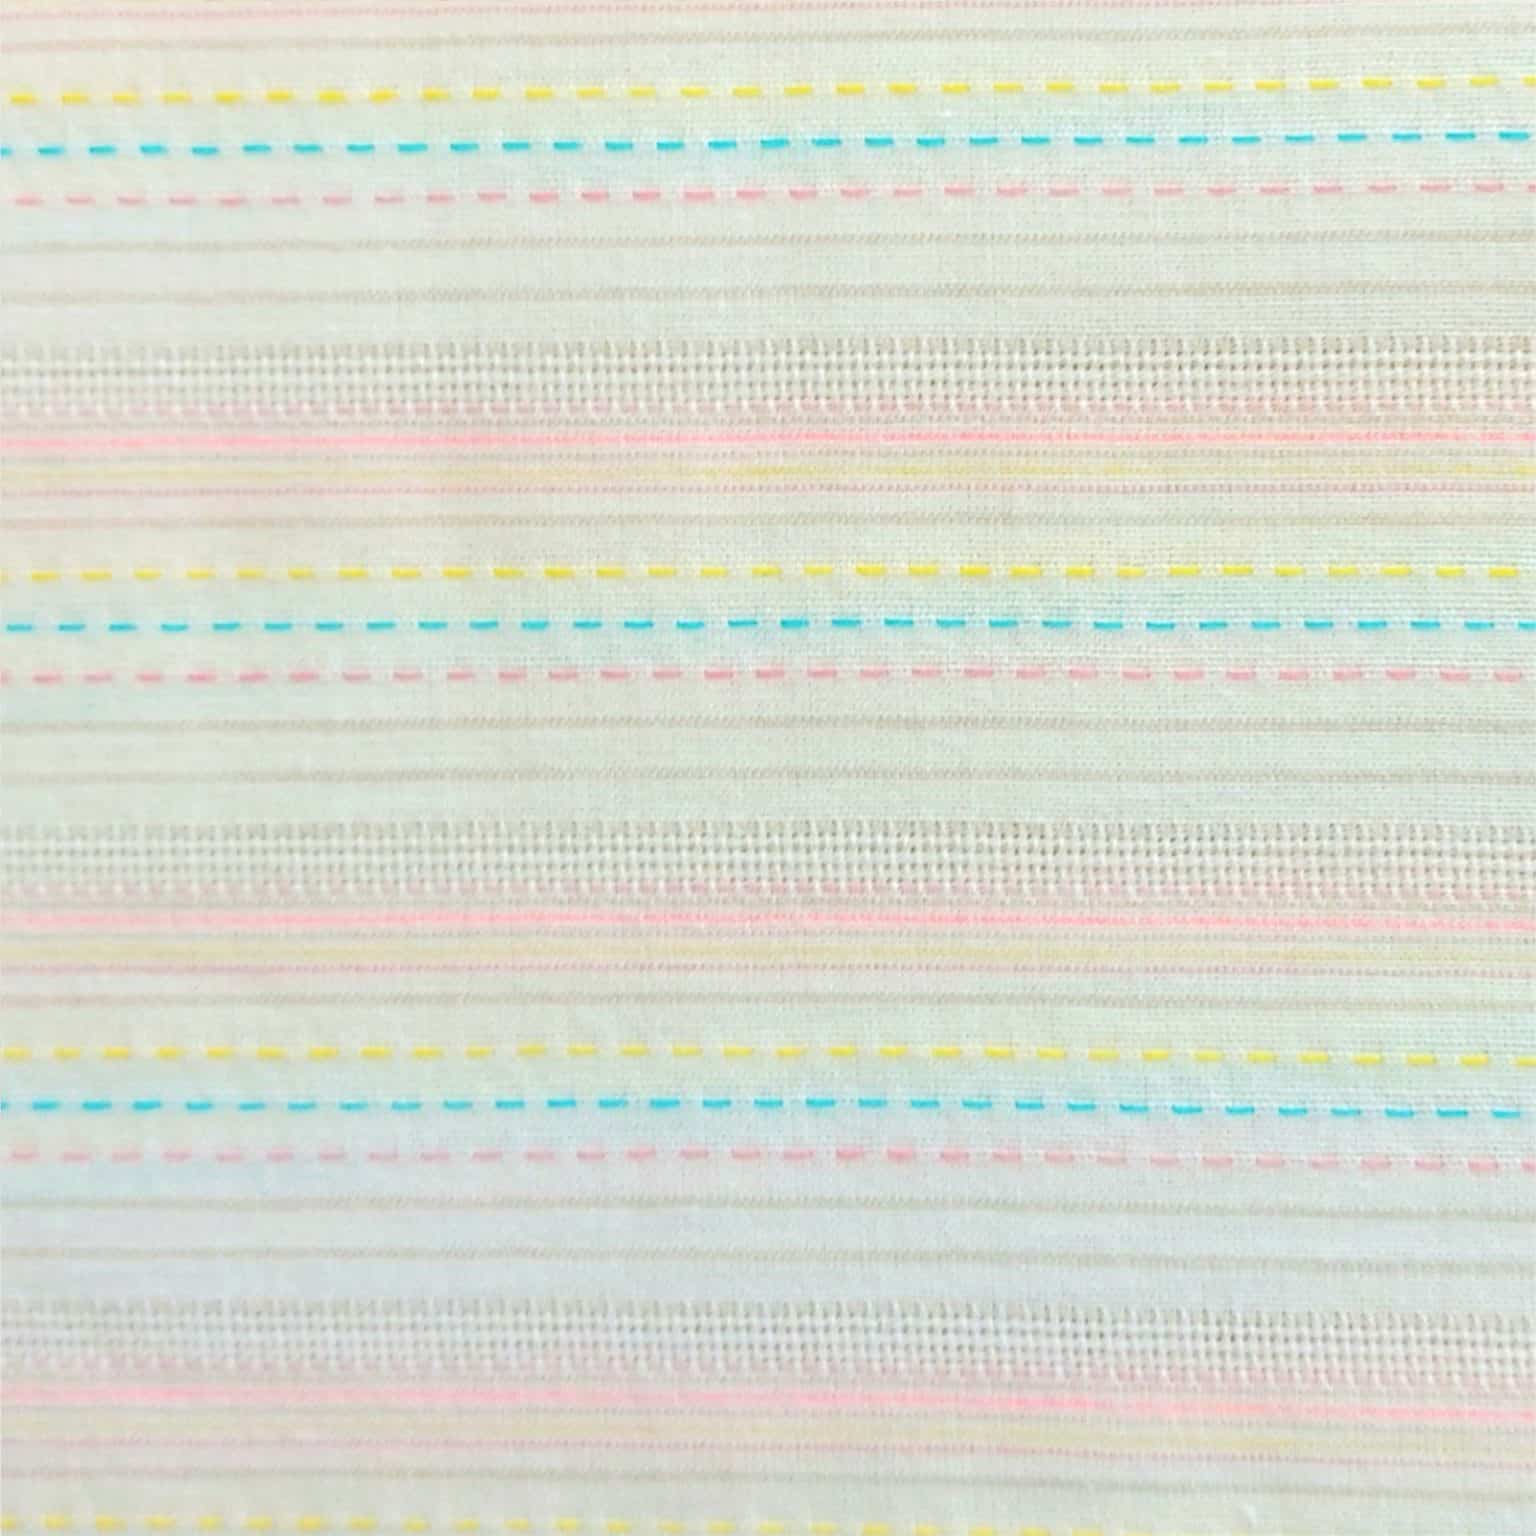 Yarn Dyed Stripe Cotton Fabric at More Sewing